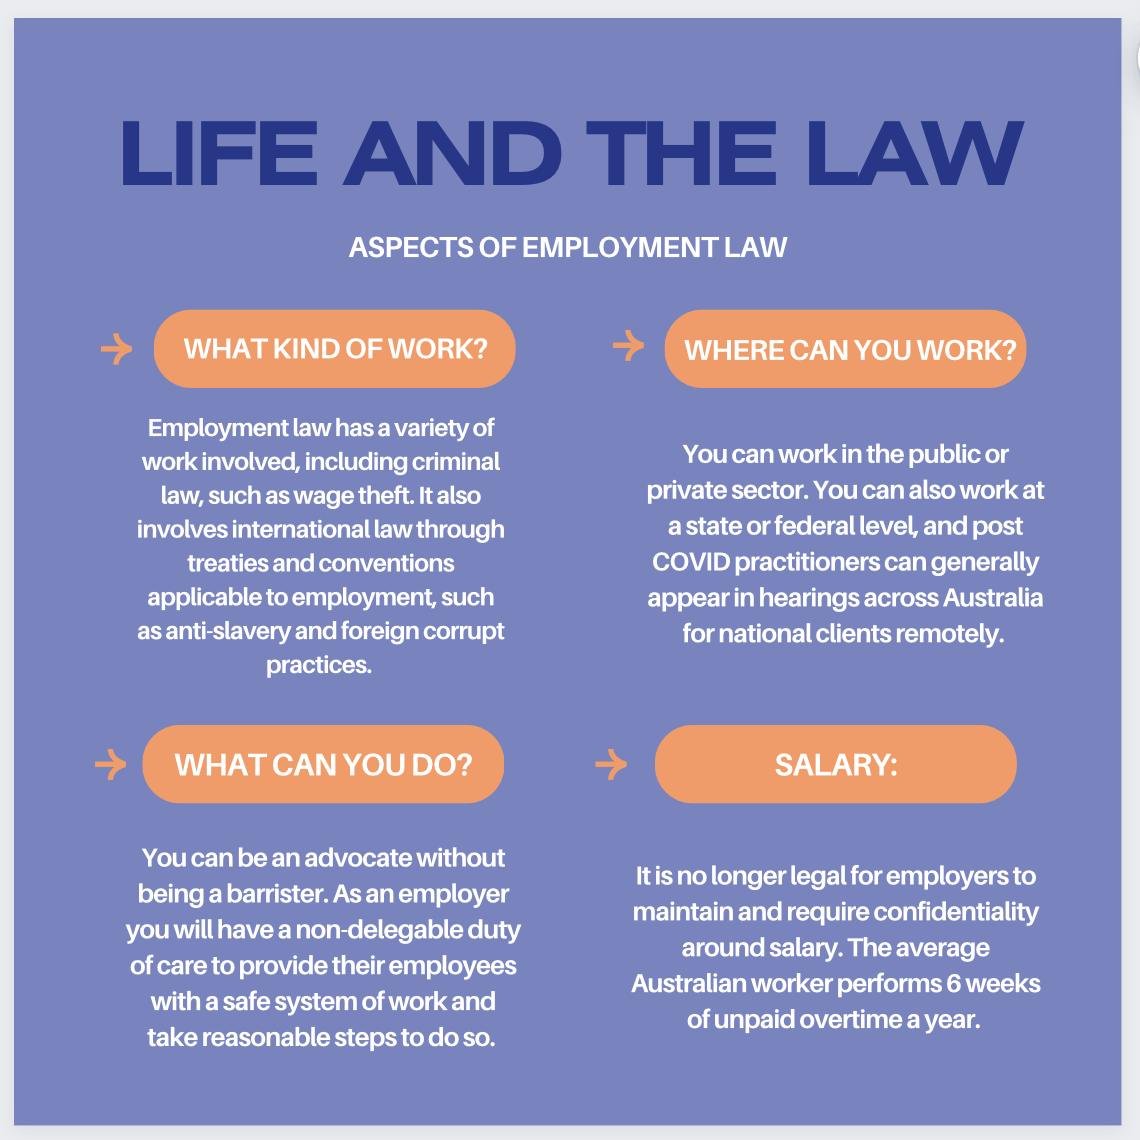 Here's are some of the notes and tips we learnt from our Life and the Law Seminar last week. Thanks again to the wonderful Stephen Hughes for taking the time to speak with us!